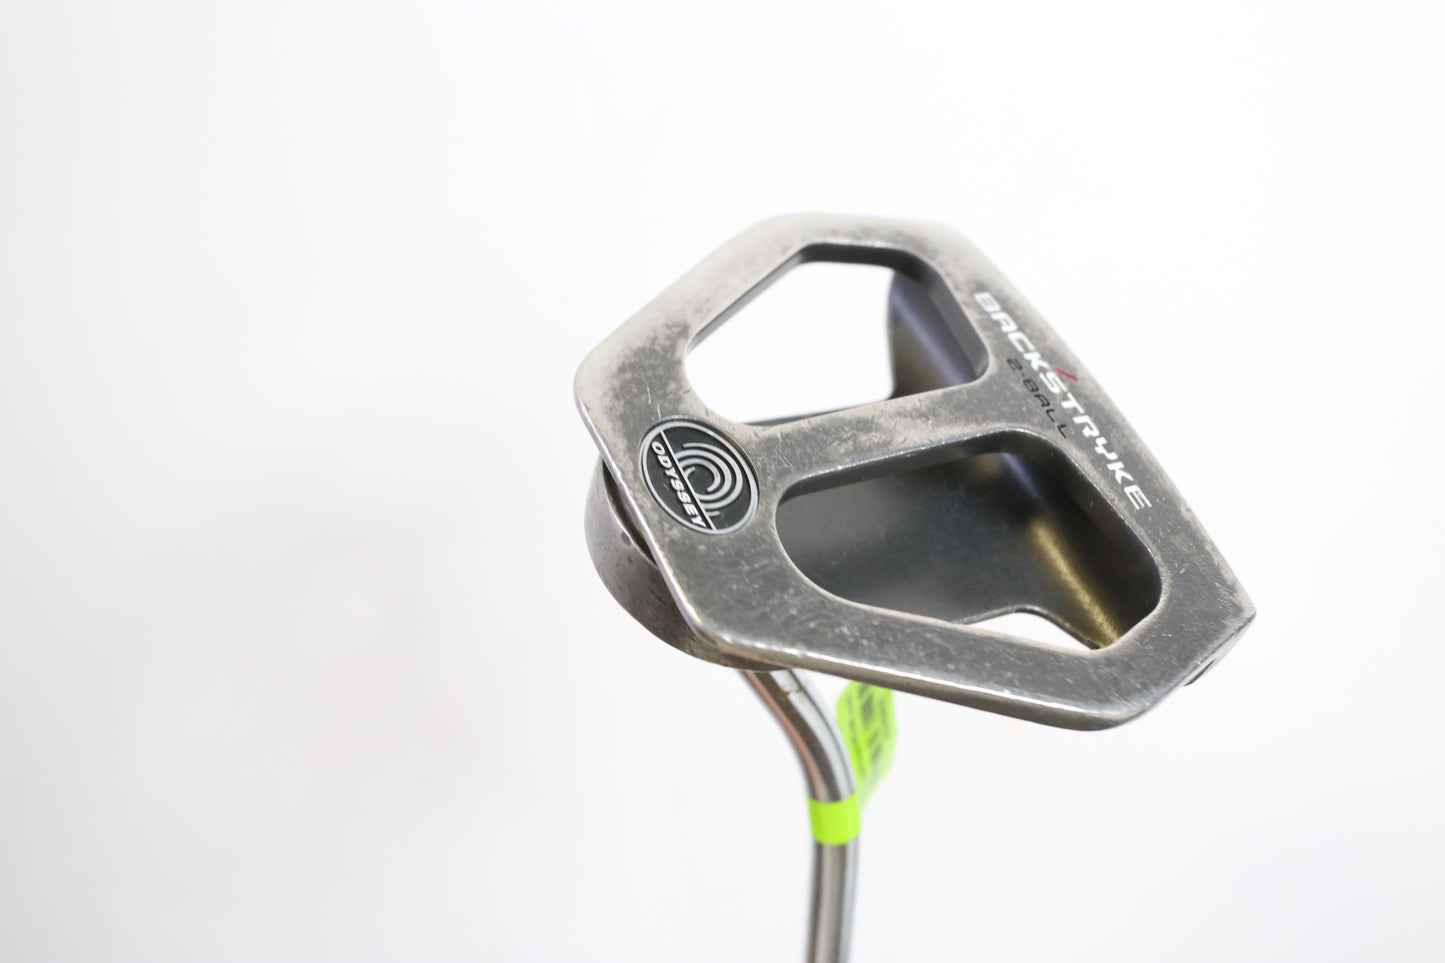 Used Odyssey Backstryke 2-Ball Putter - Right-Handed - 32 in - Mallet-Next Round